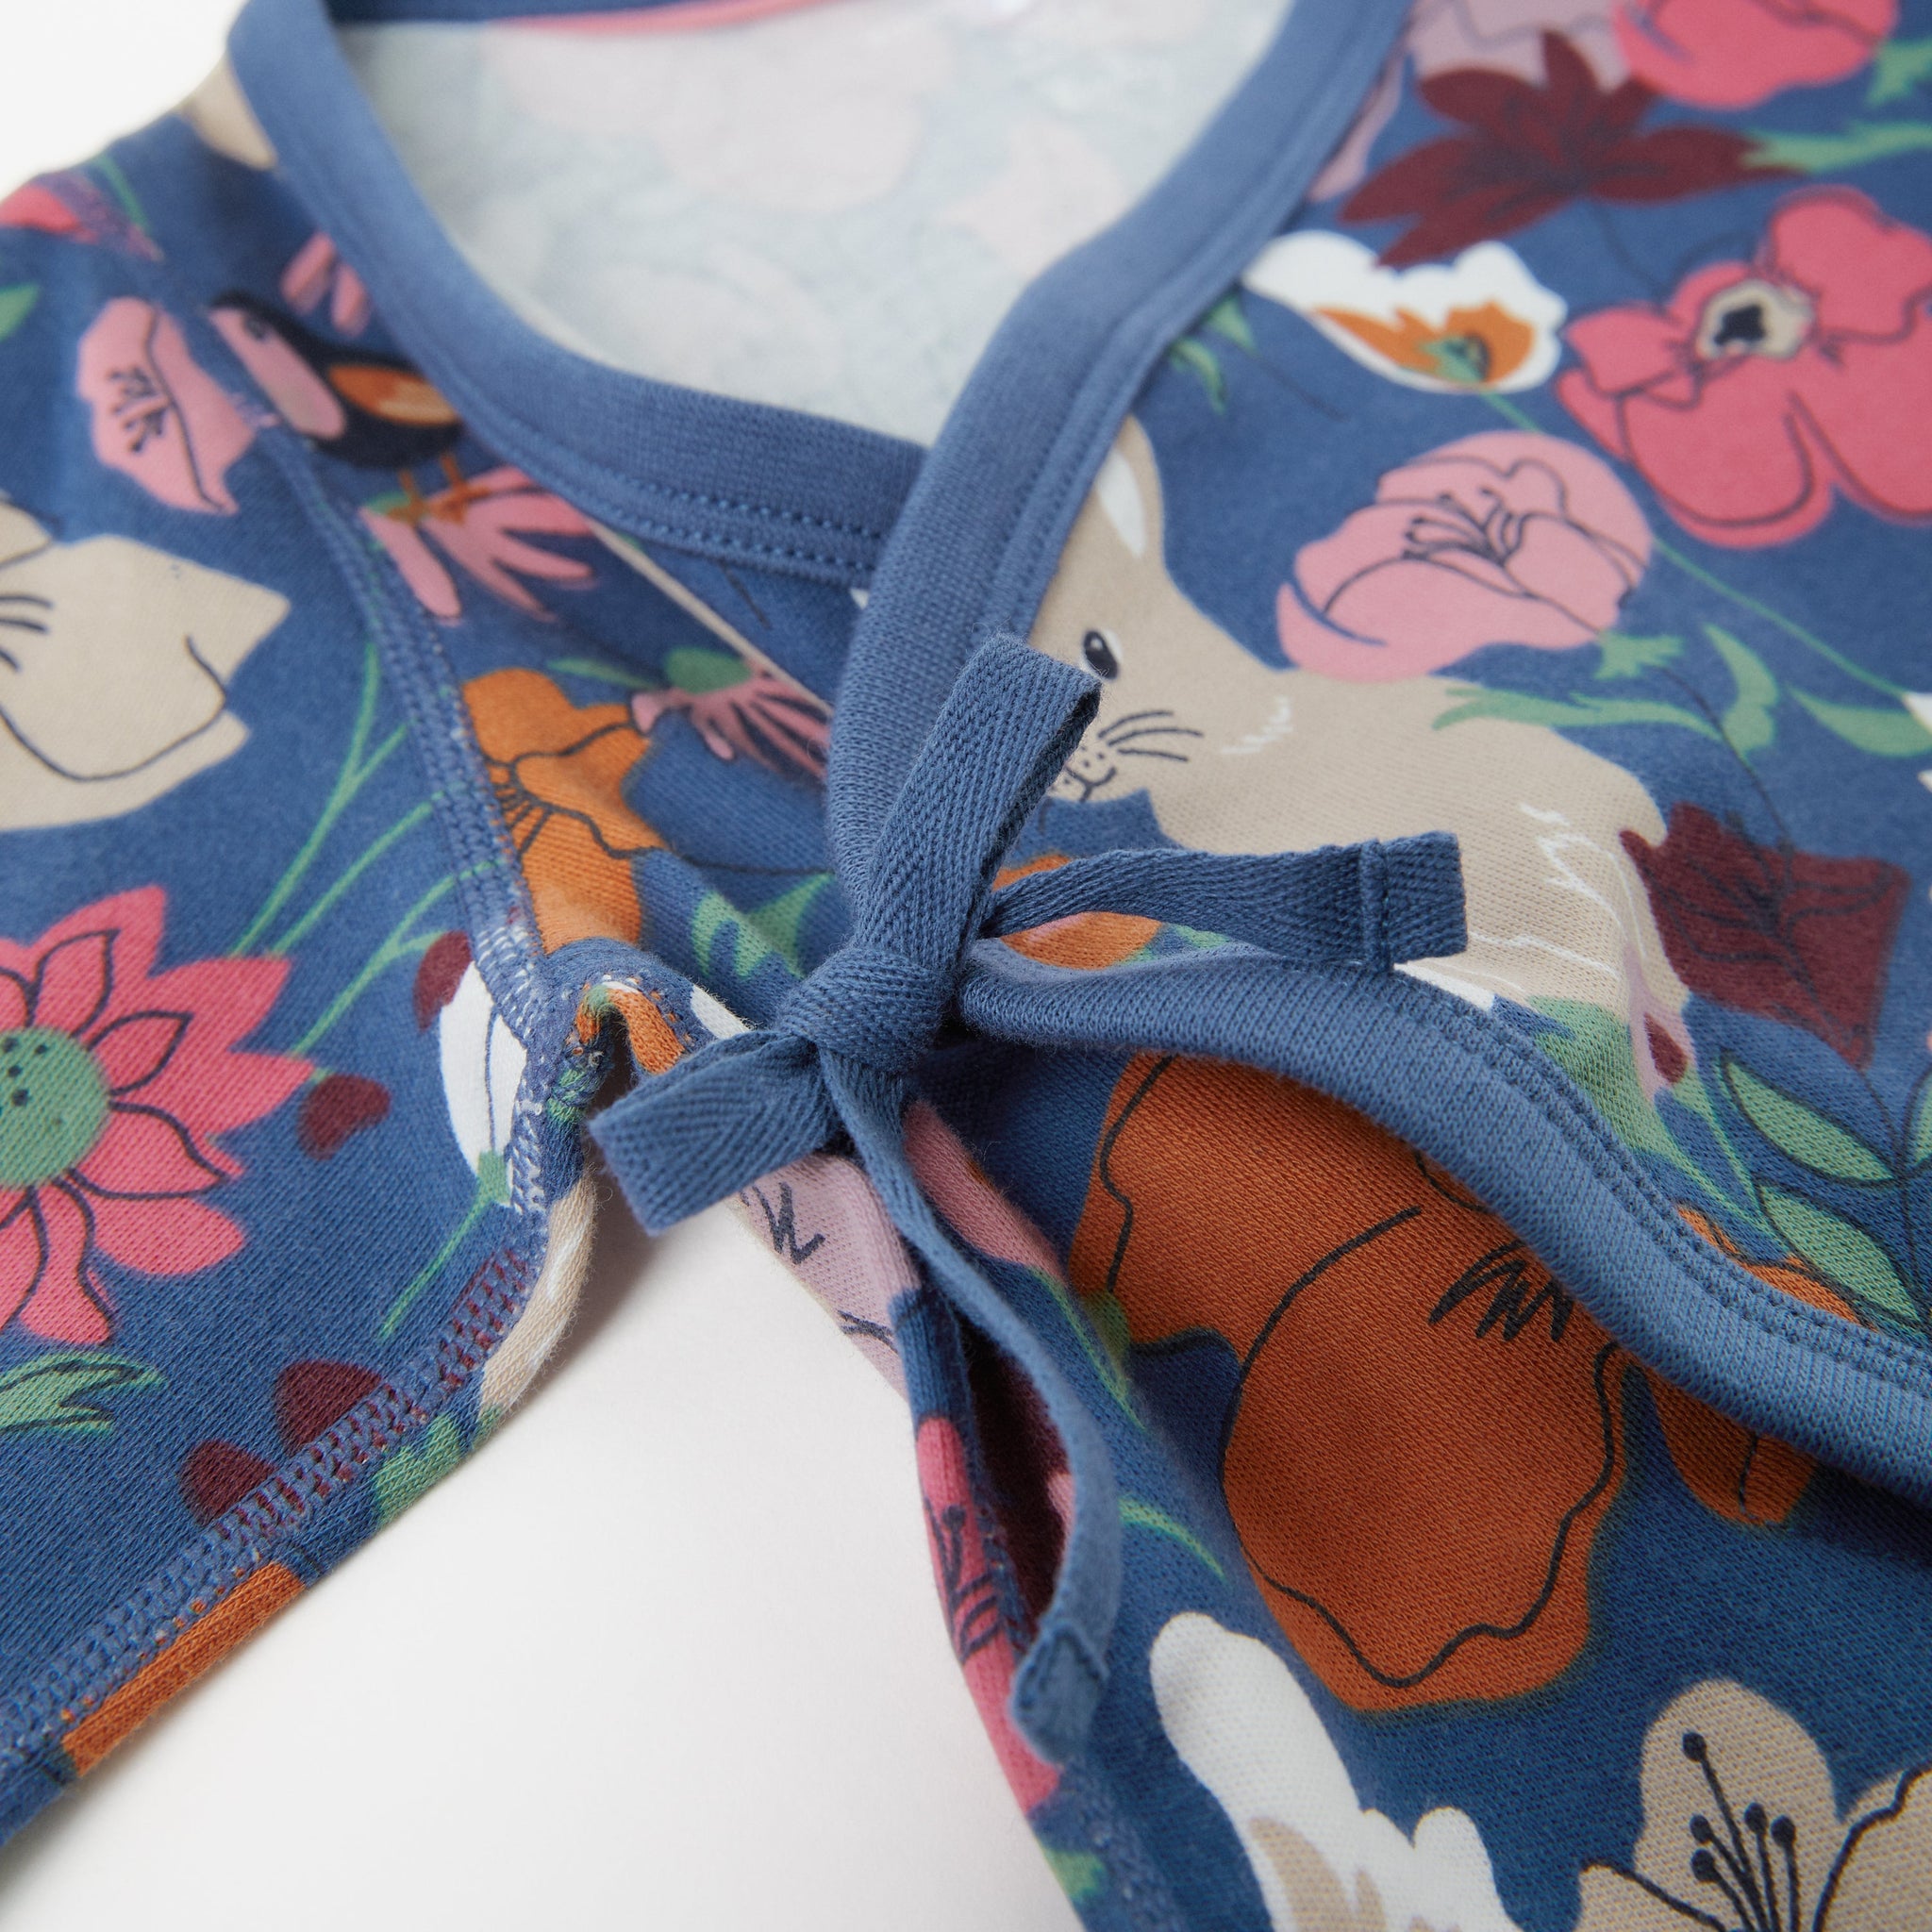 Nordic Blue Floral Baby Sleepsuit from the Polarn O. Pyret Kidswear collection. Clothes made using sustainably sourced materials.